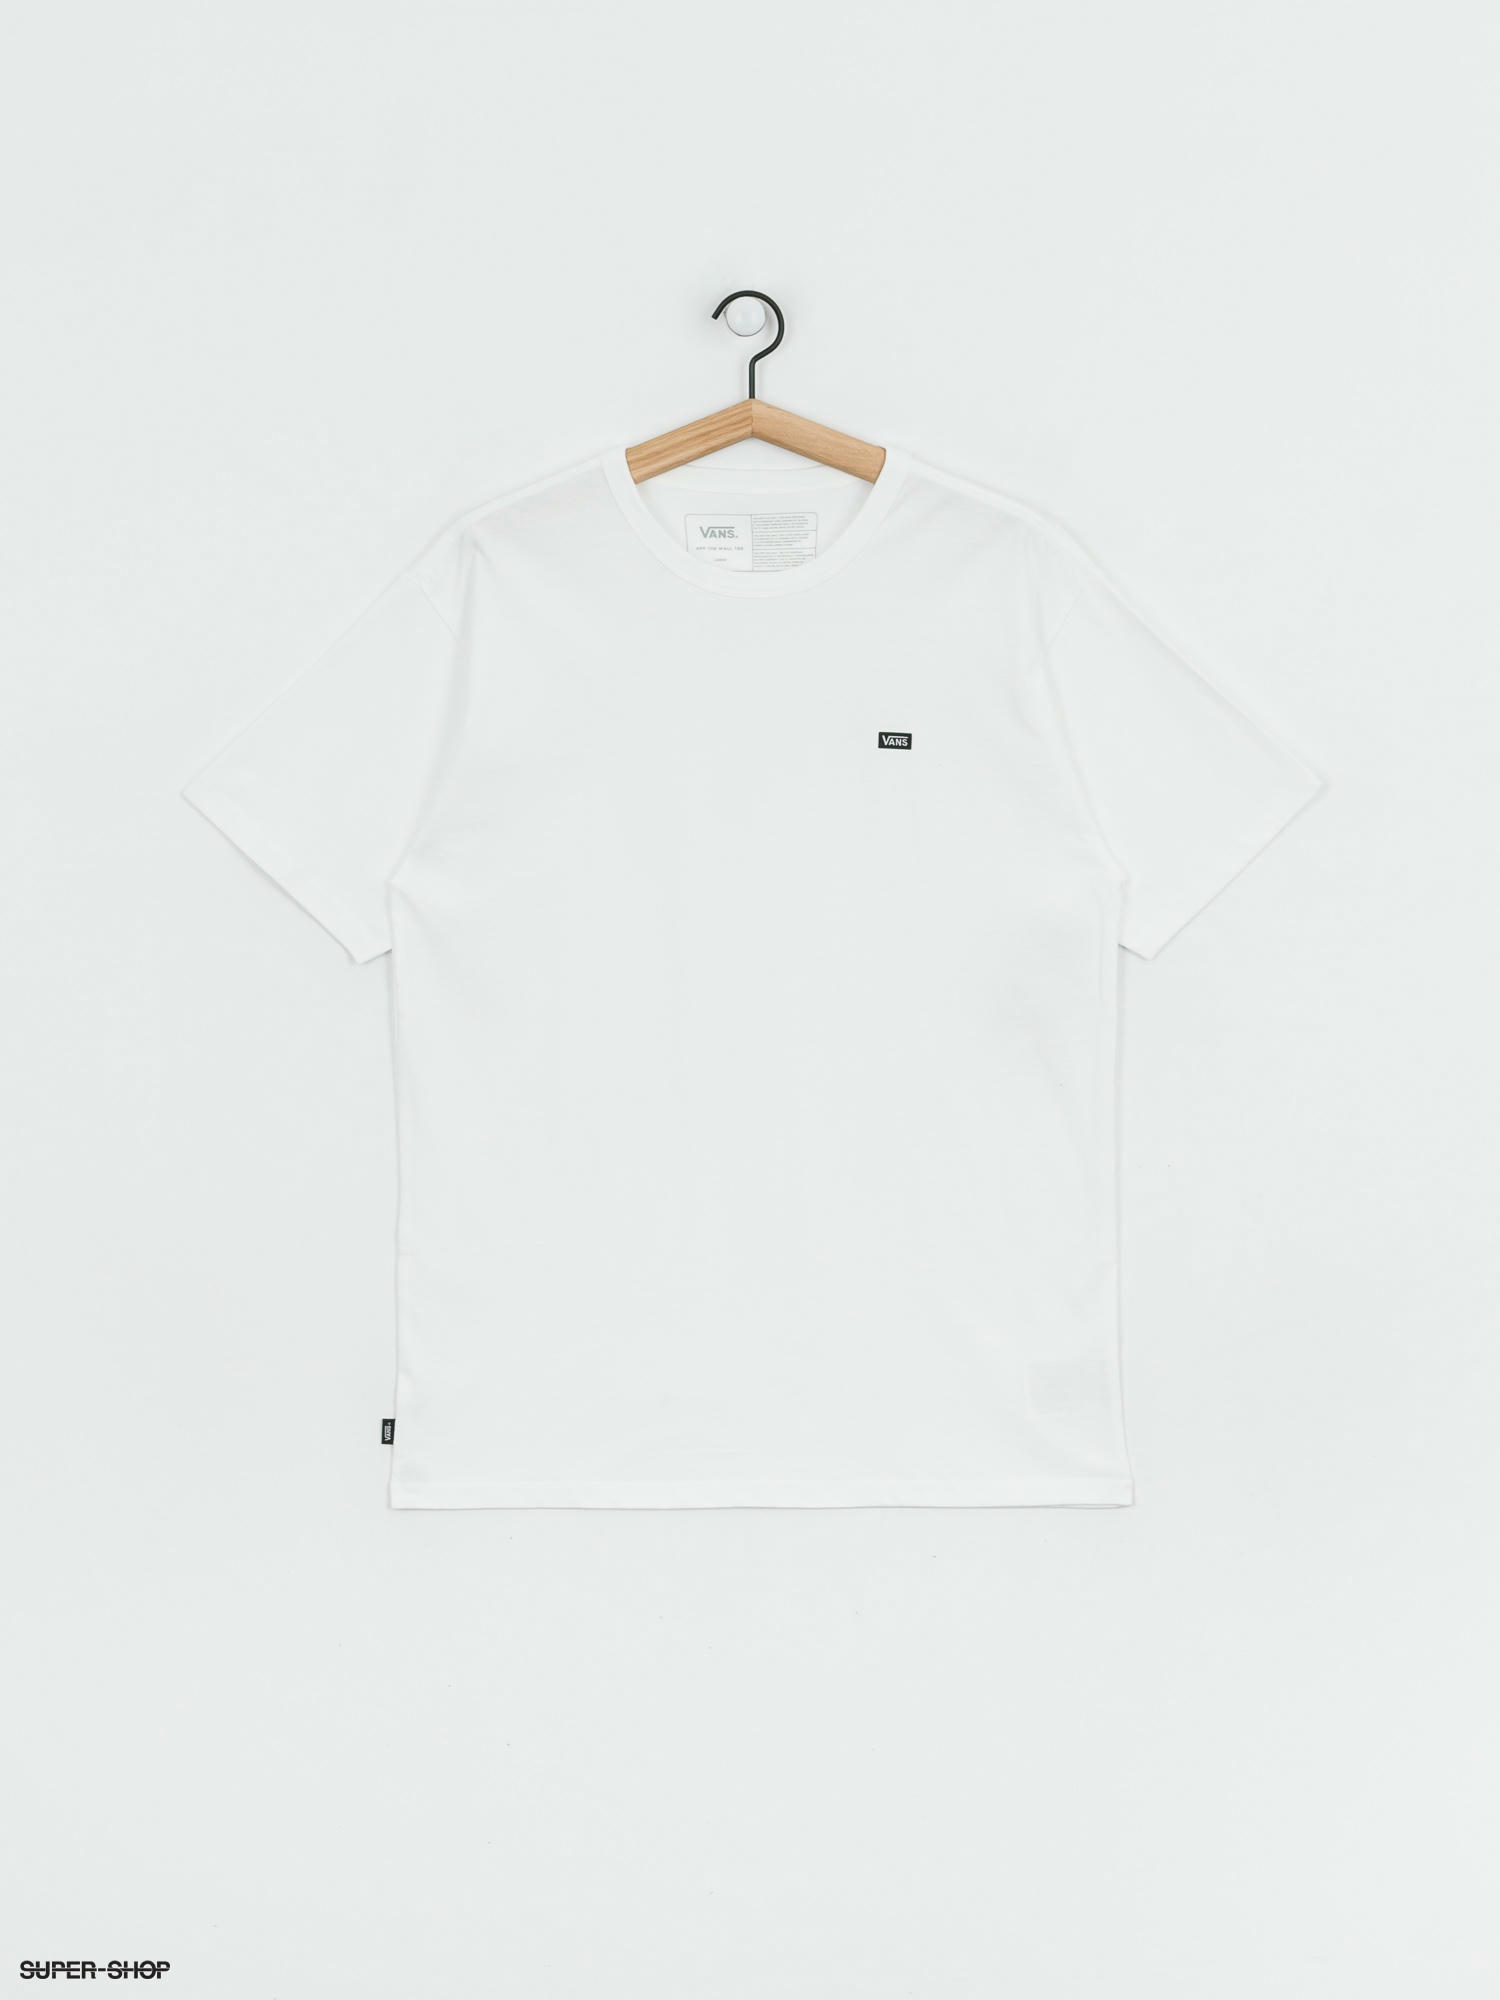 vans off the wall t shirt white